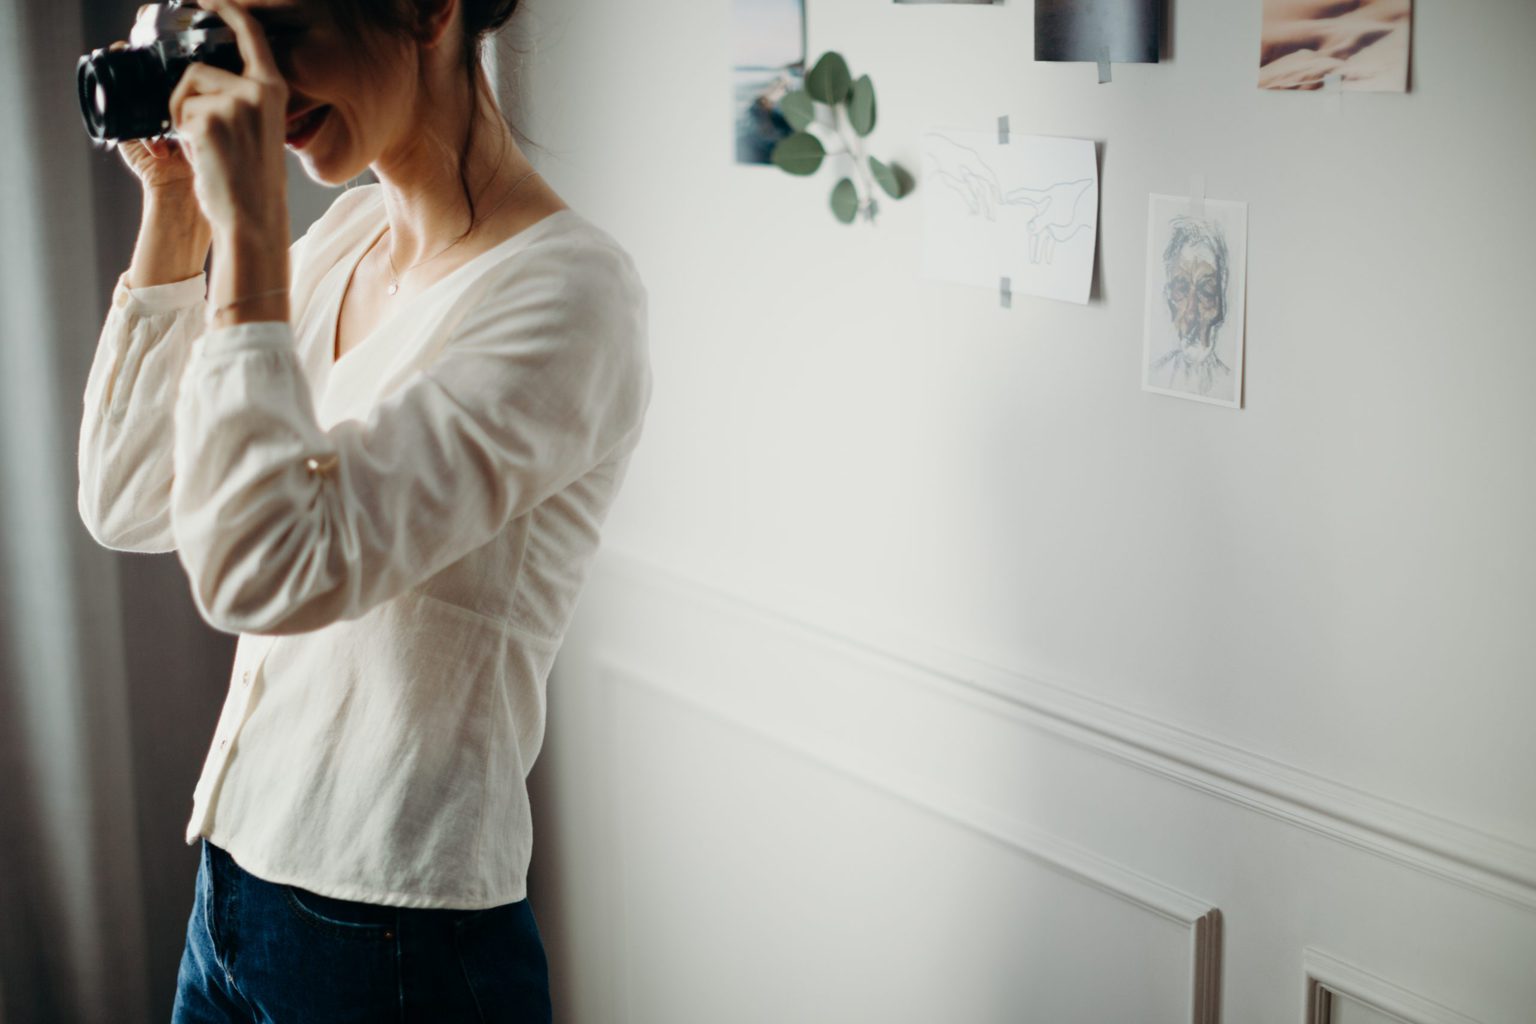 at home date ideas
woman taking photograph in white blouse
source: cottonbro from Pexels